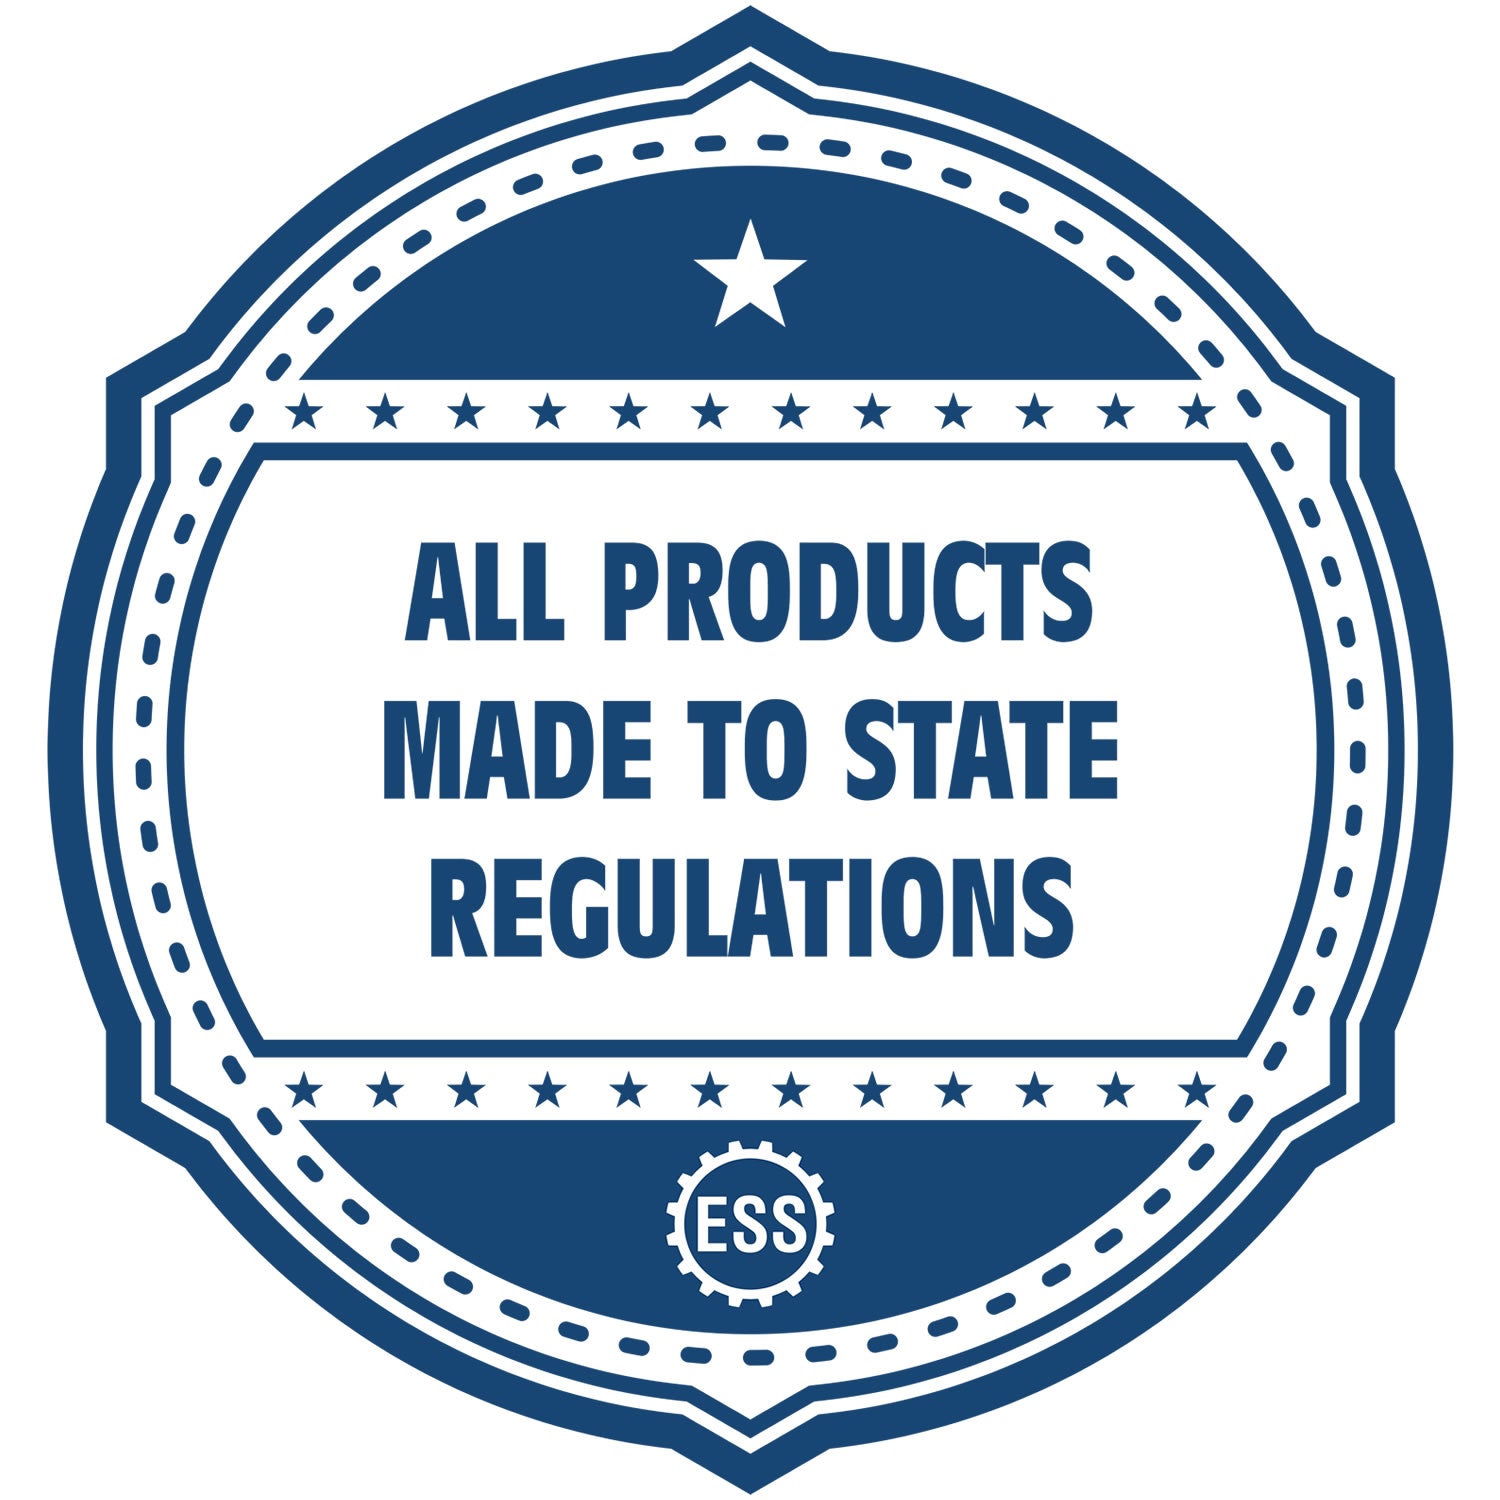 An icon or badge element for the Self-Inking Connecticut Landscape Architect Stamp showing that this product is made in compliance with state regulations.